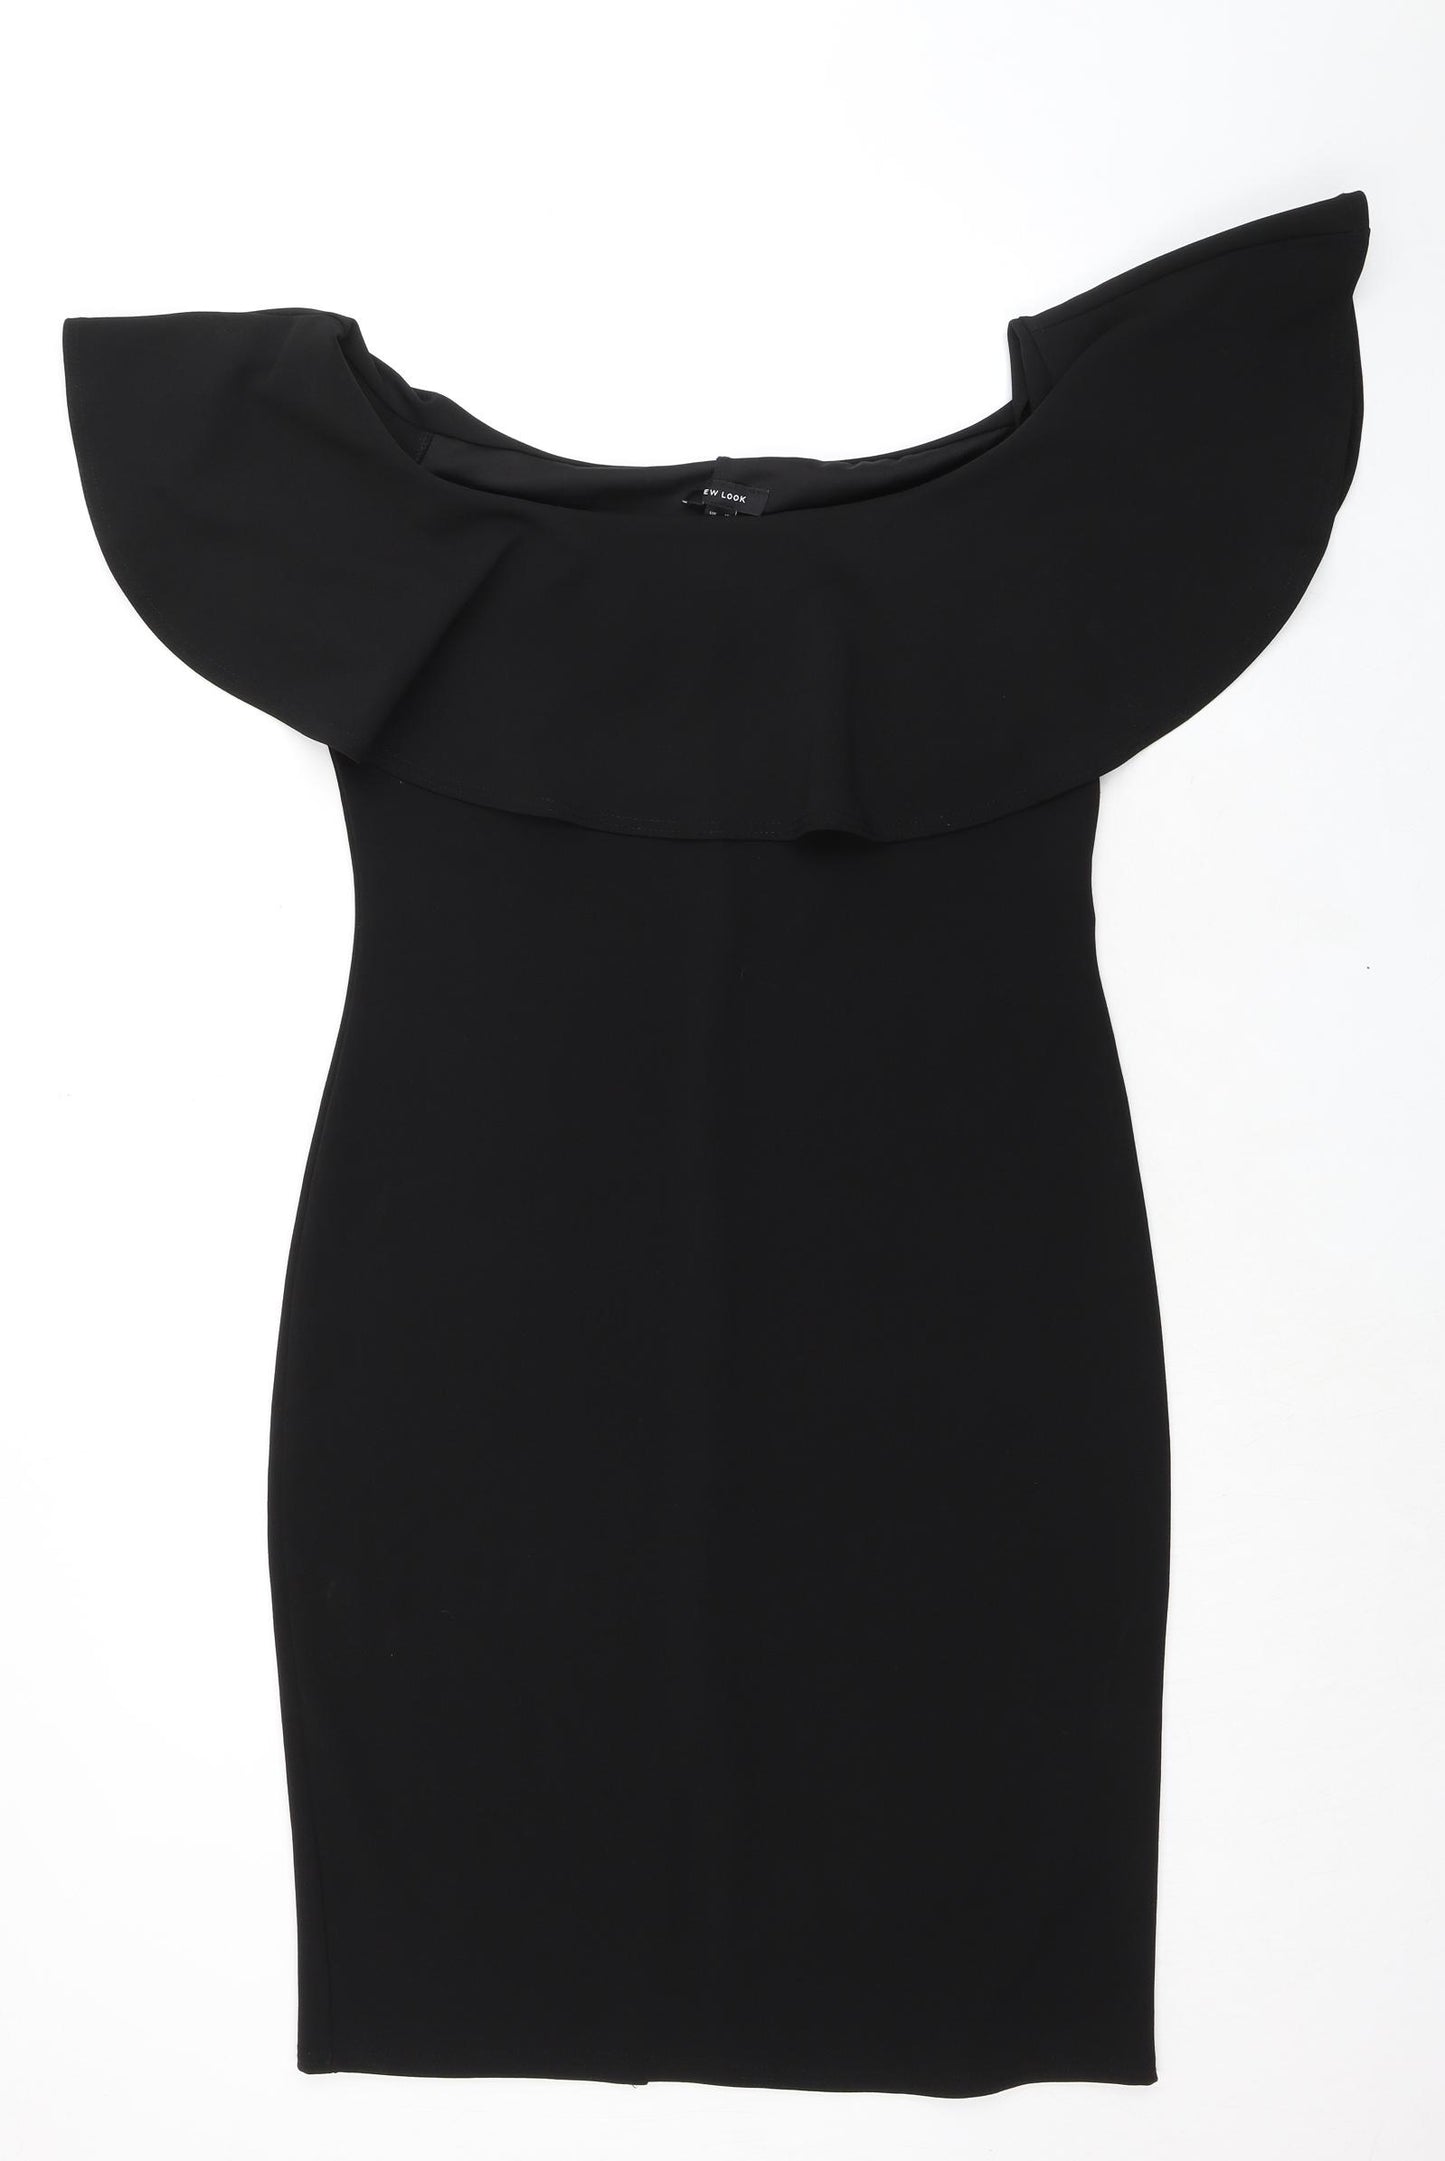 New Look Womens Black Polyester Bodycon Size 18 Off the Shoulder Pullover